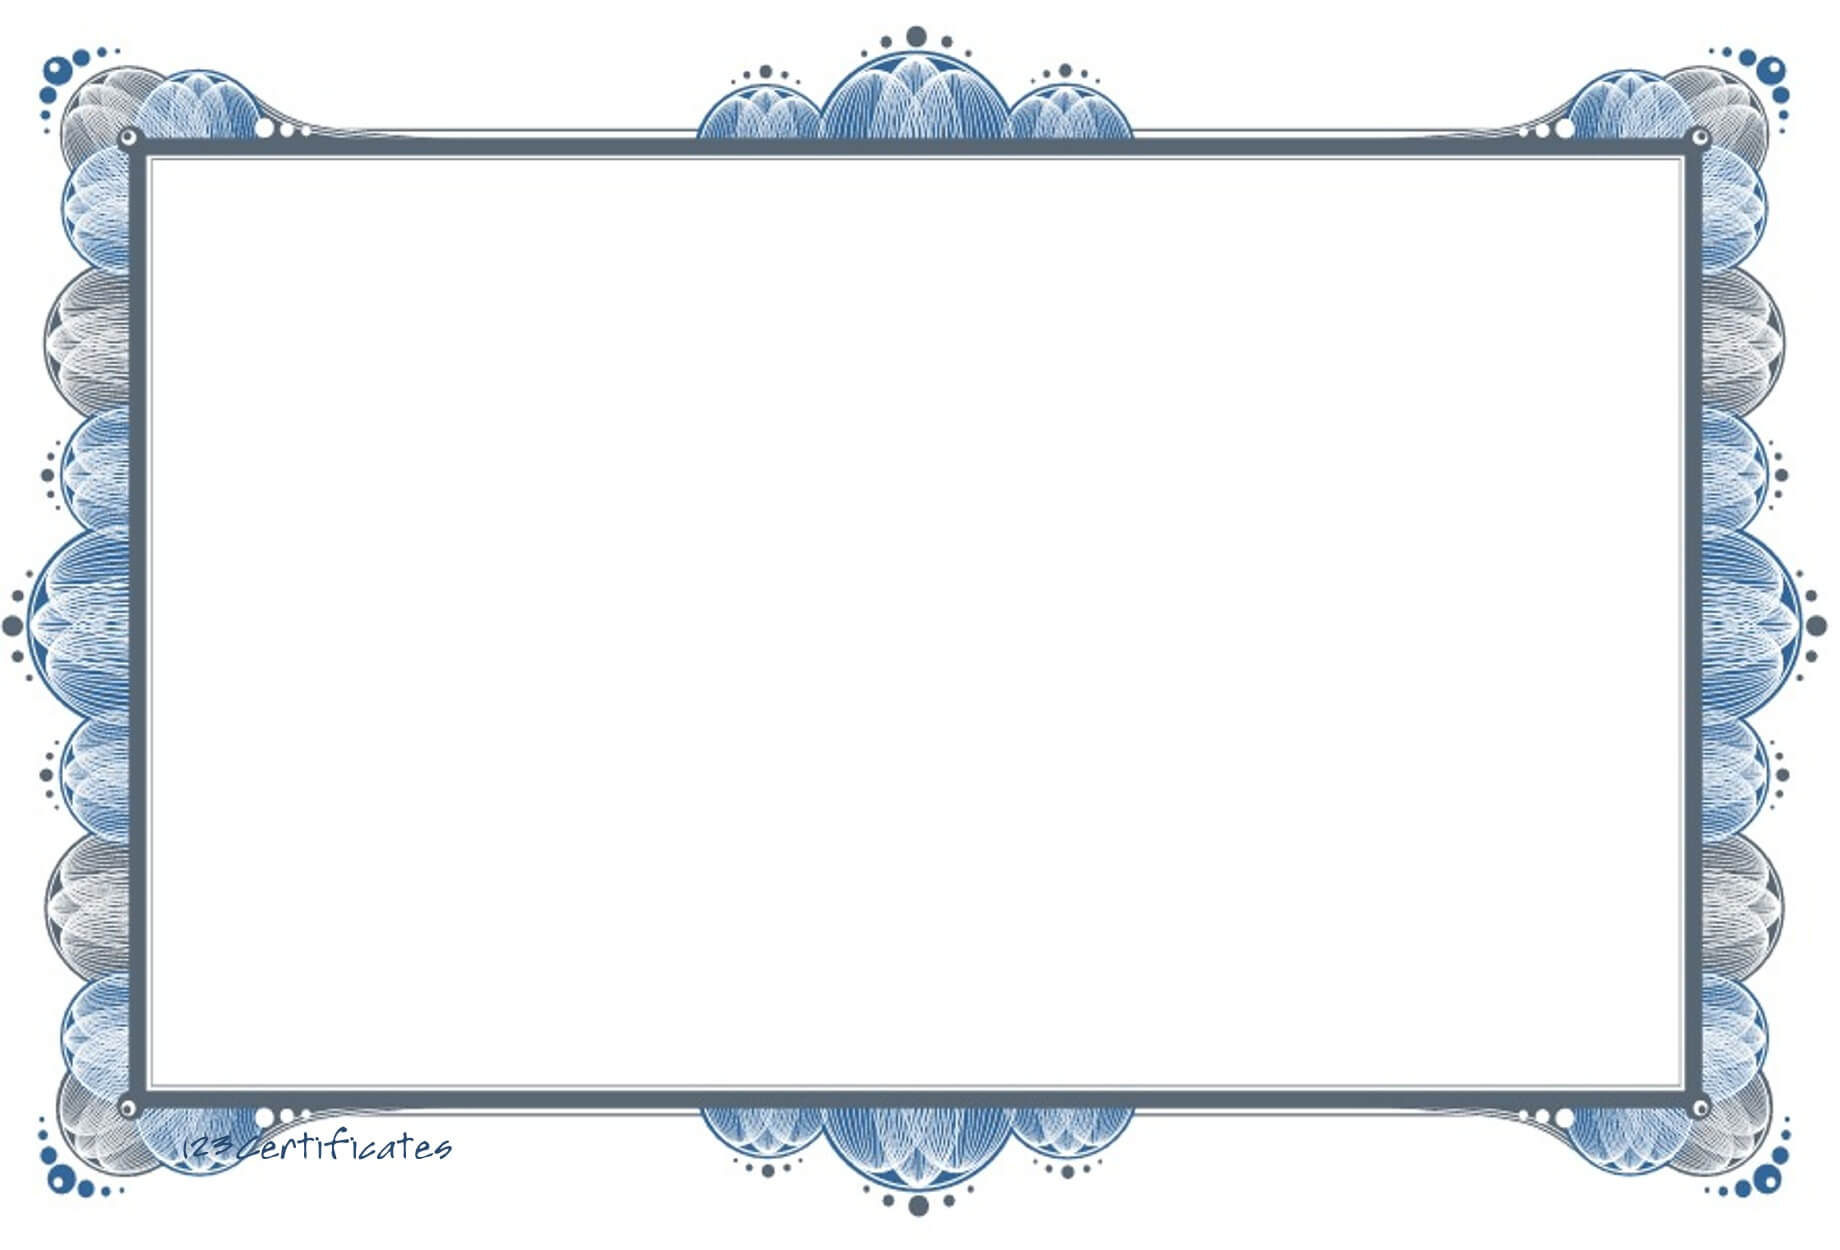 Free Certificate Border, Download Free Clip Art, Free Clip Within Word Border Templates Free Download